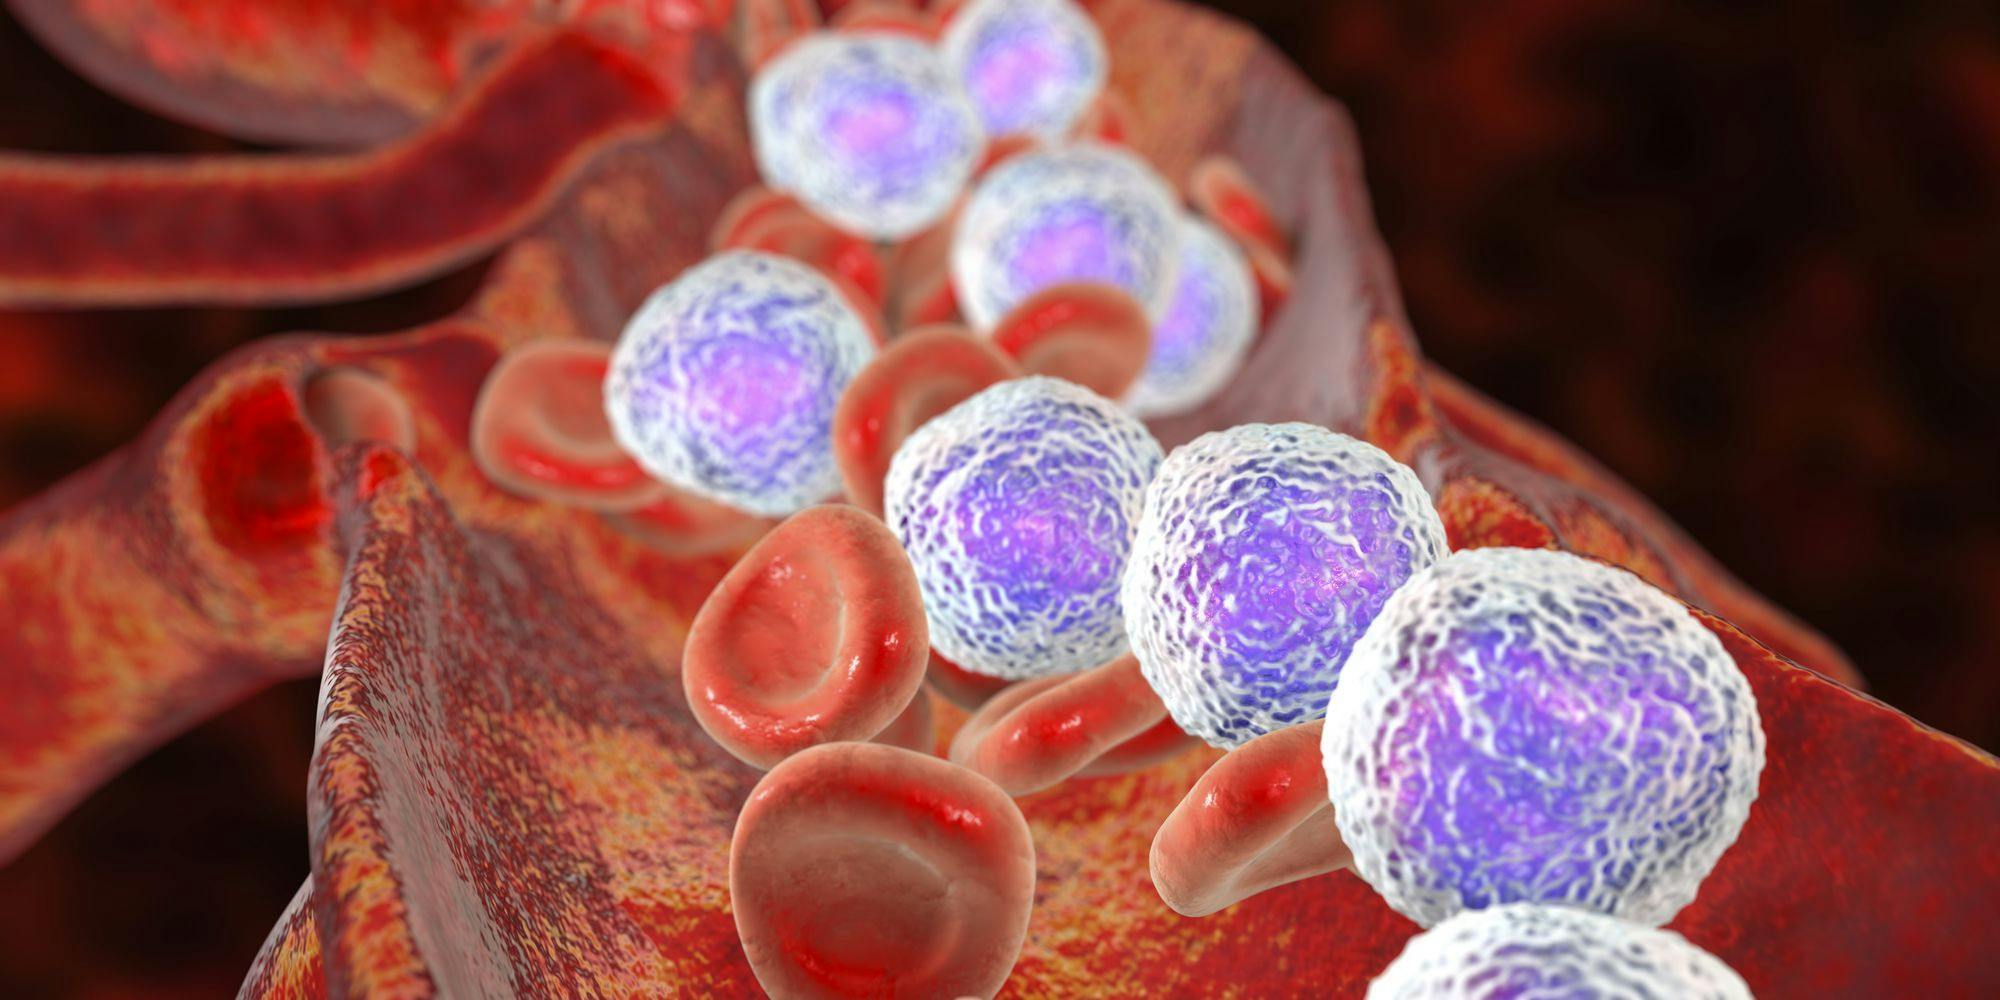 Investigators are expected to share initial safety and efficacy data from a phase 1/2 trial assessing IMPT-314 as a treatment for aggressive B-cell lymphoma in the second half of 2023.